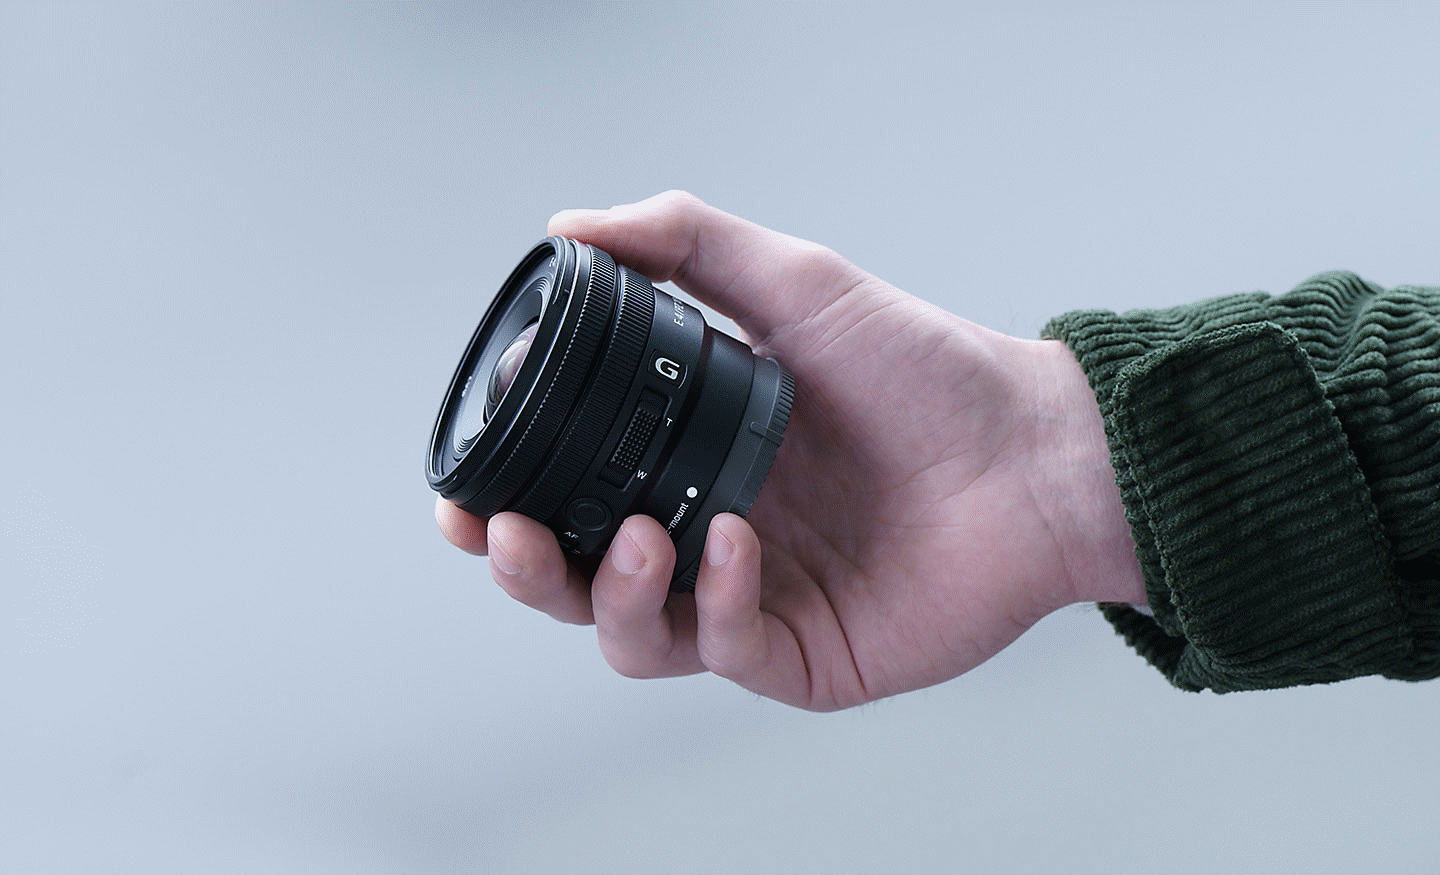 Image of a person's hand holding the E PZ 10–20 mm F4 G, showing that the lens is small enough to fit in their hand